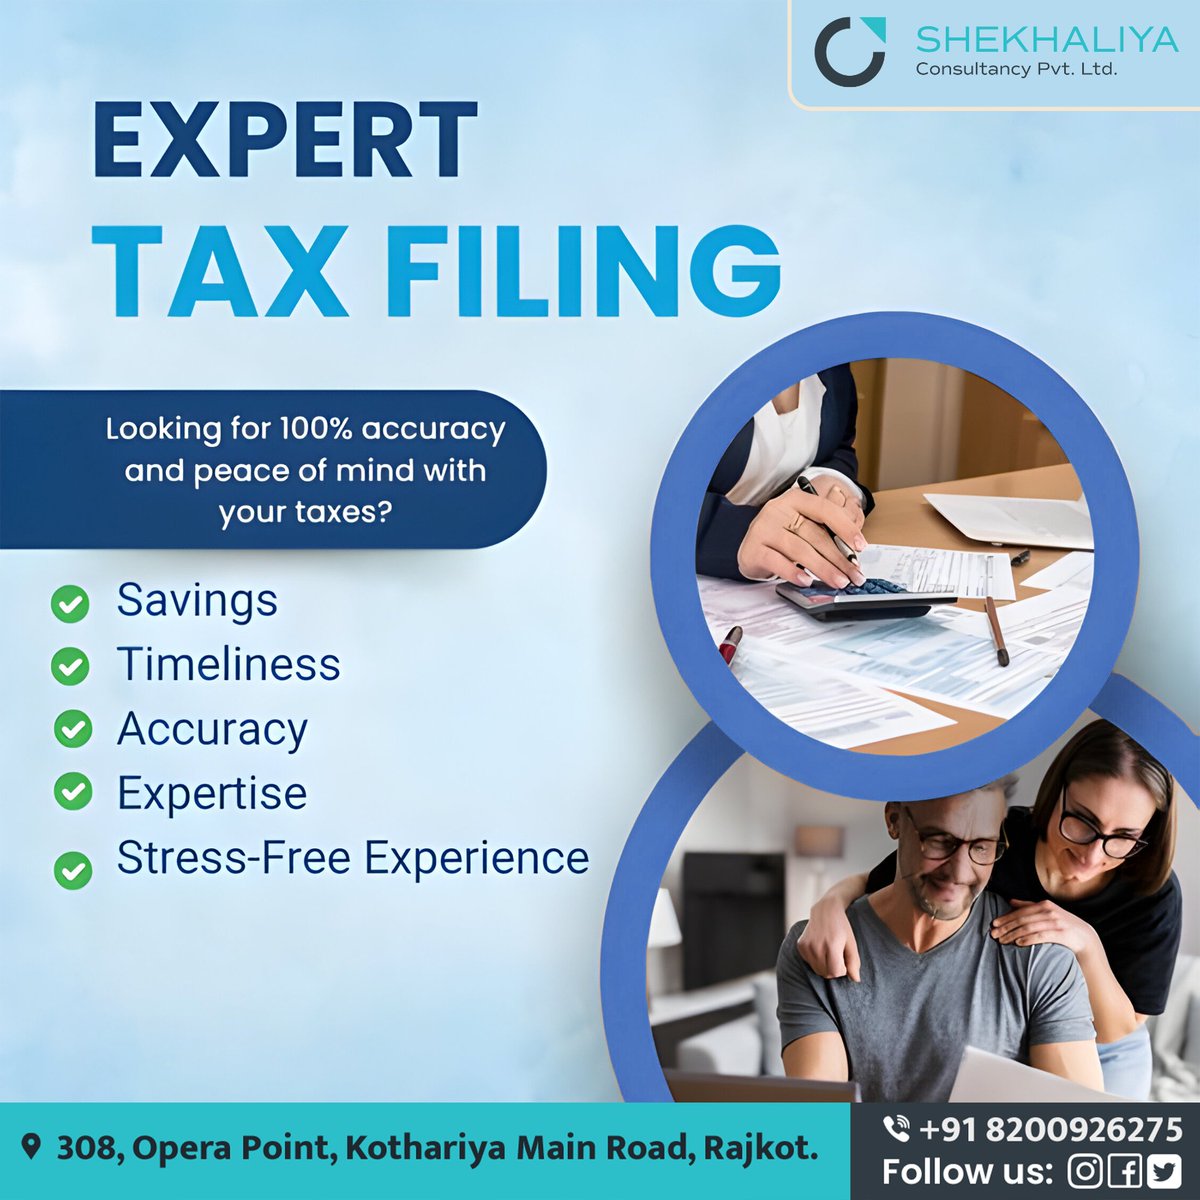 We are Expert in Tax Filling 
Benefits:- 
Savings 
Timeliness 
Accuracy 
Expertise 
Stress-Free Experience
.
.
.
#shekhaliyaconsultancy #consultancyservices #consultancyagency #loanservices #accounting  #ServicesOffered  #taxconsulting #accountingandfinance #accountingservice